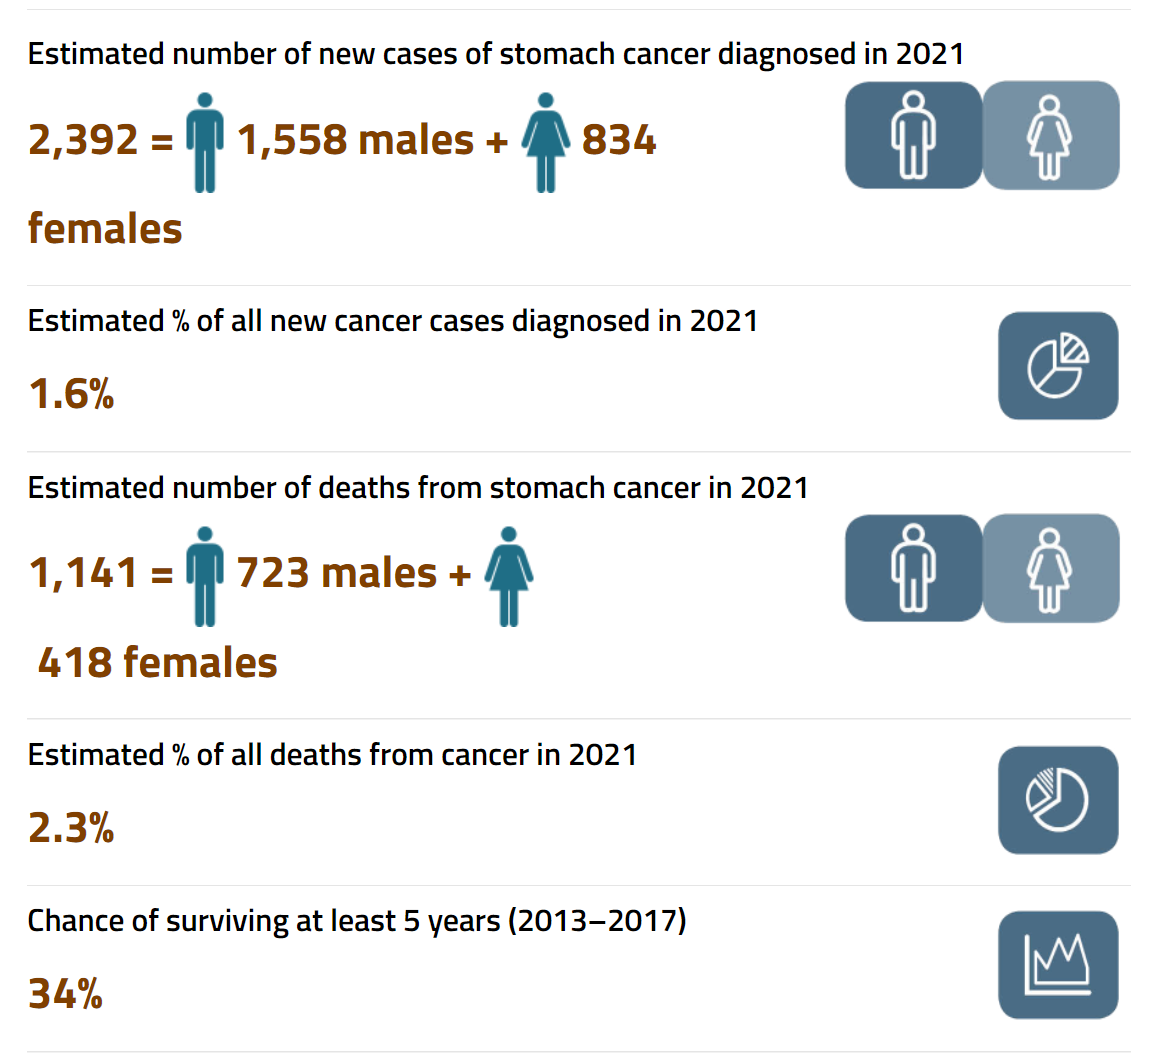 (Source: Cancer Australia) An Infographic detailing the incidence of stomach cancer in Australia through 2021